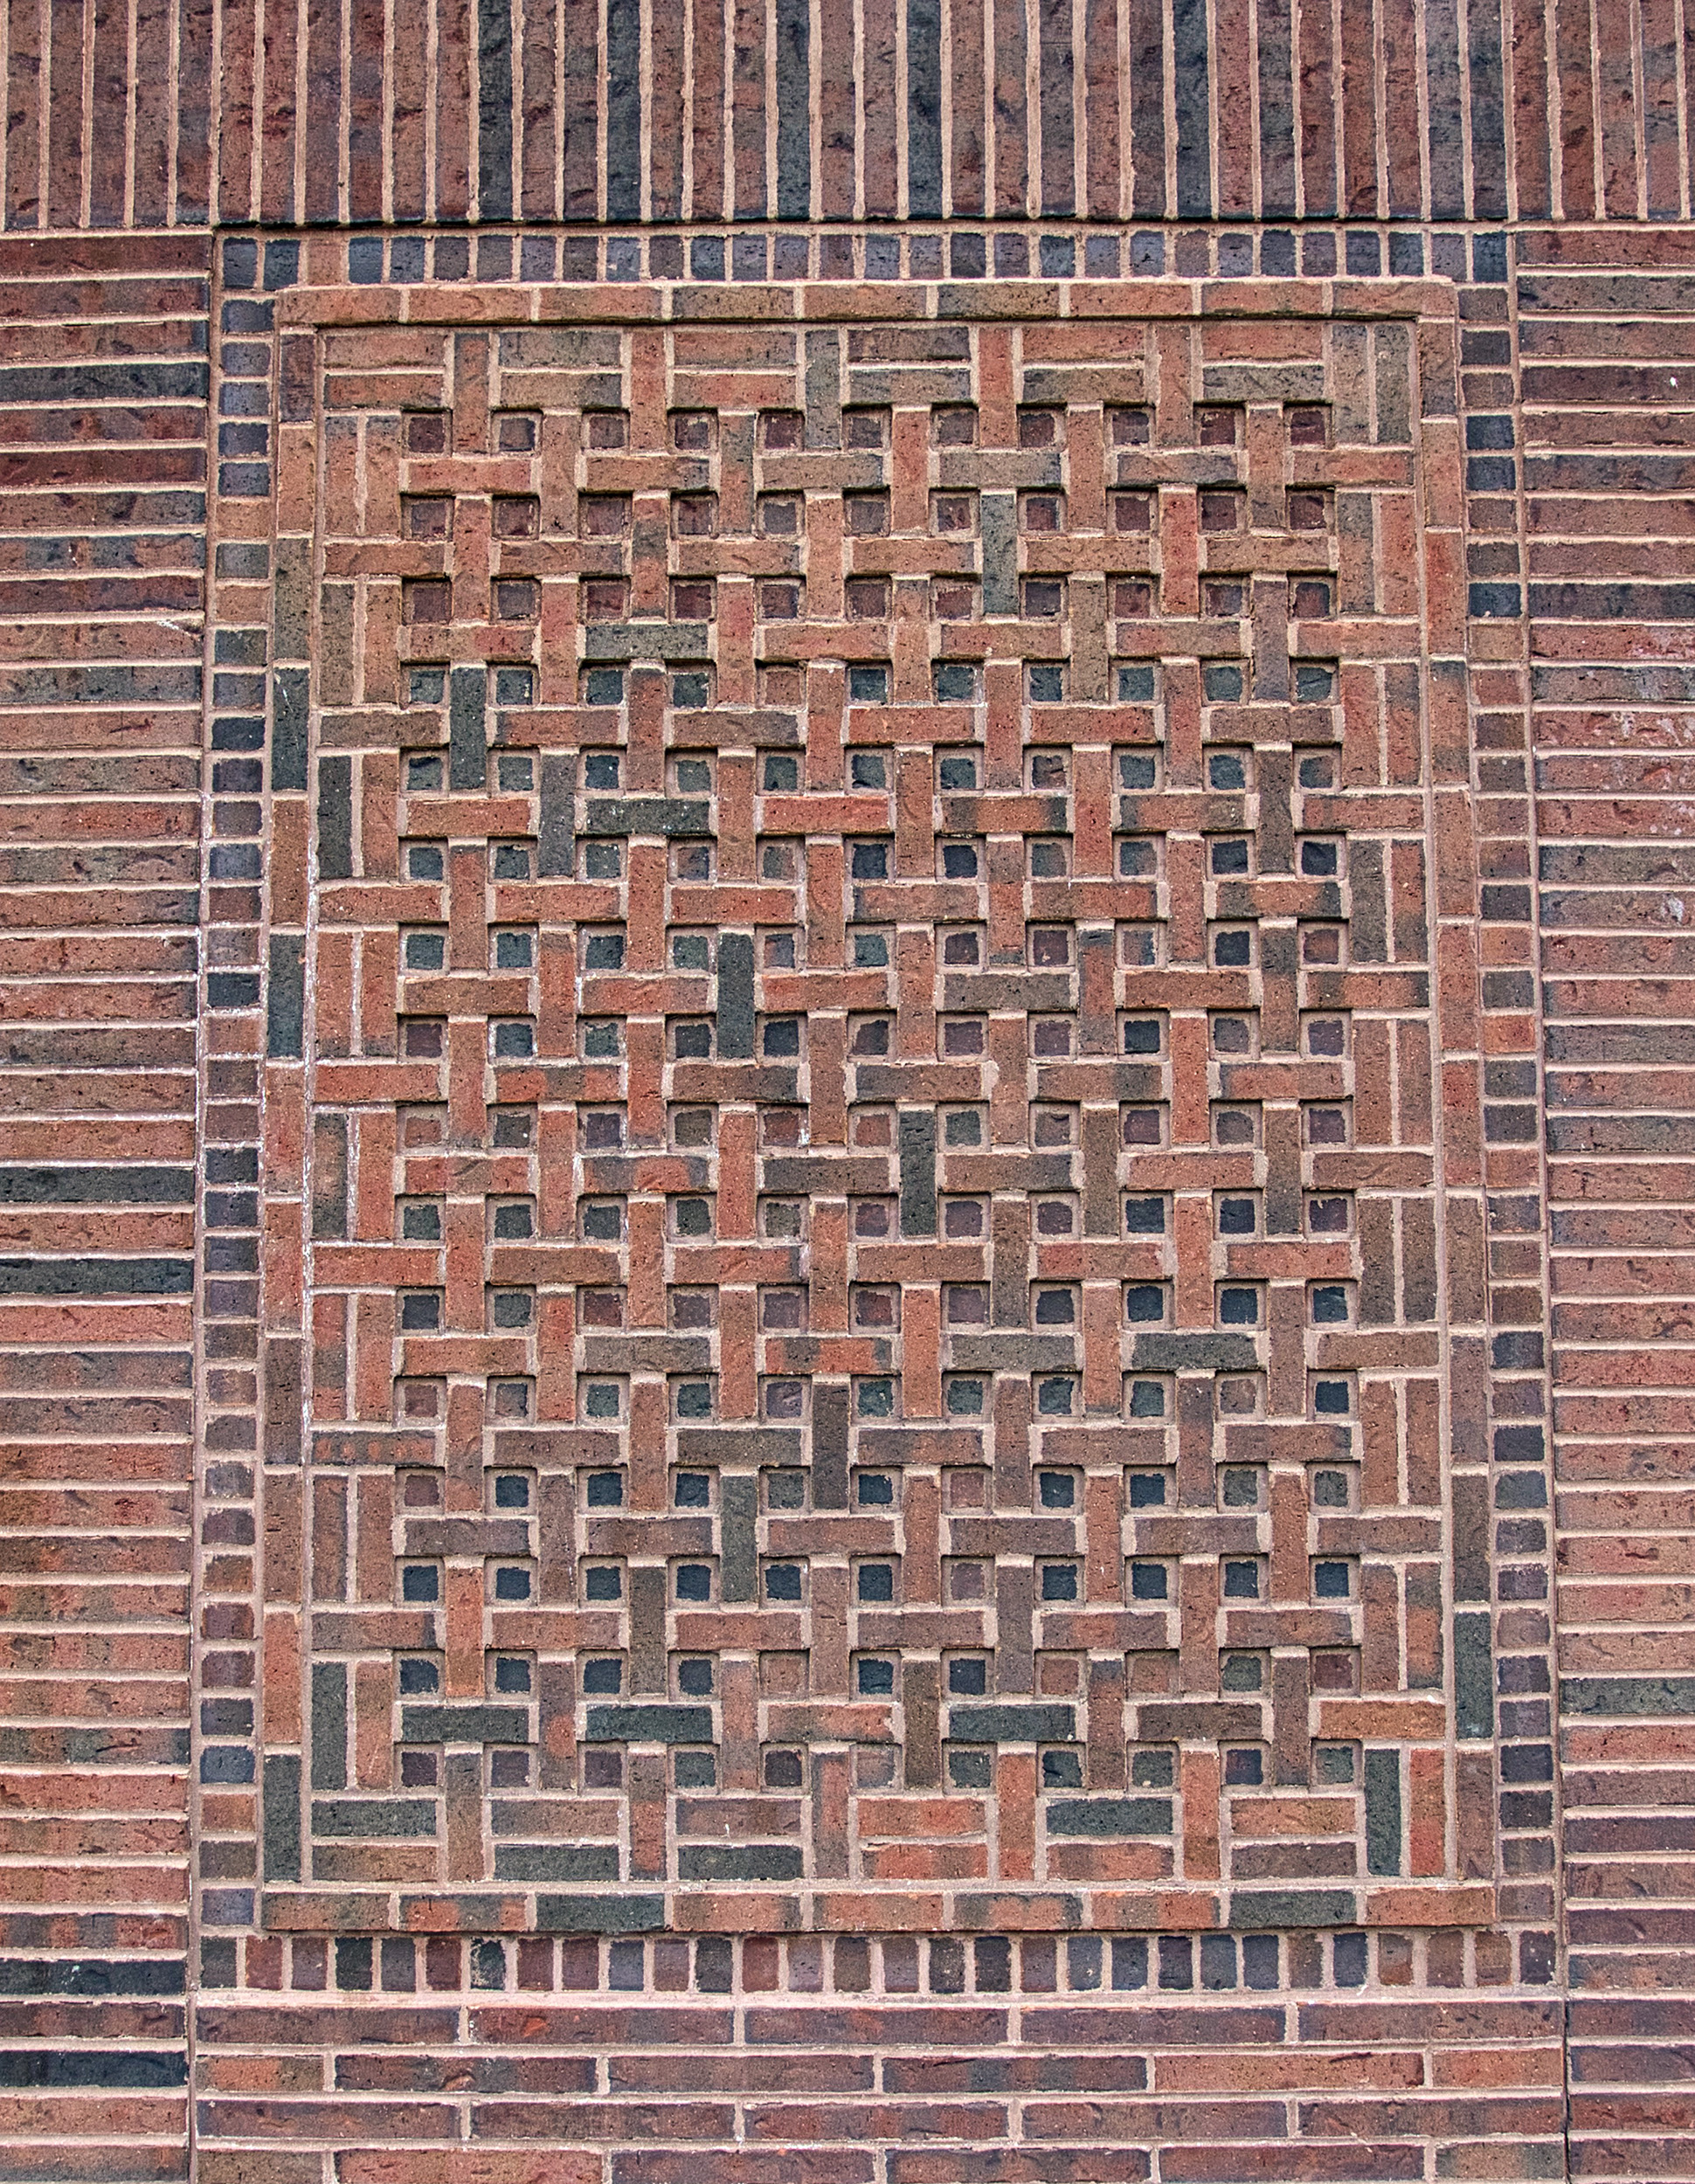 CA6 red brick commercial architecture